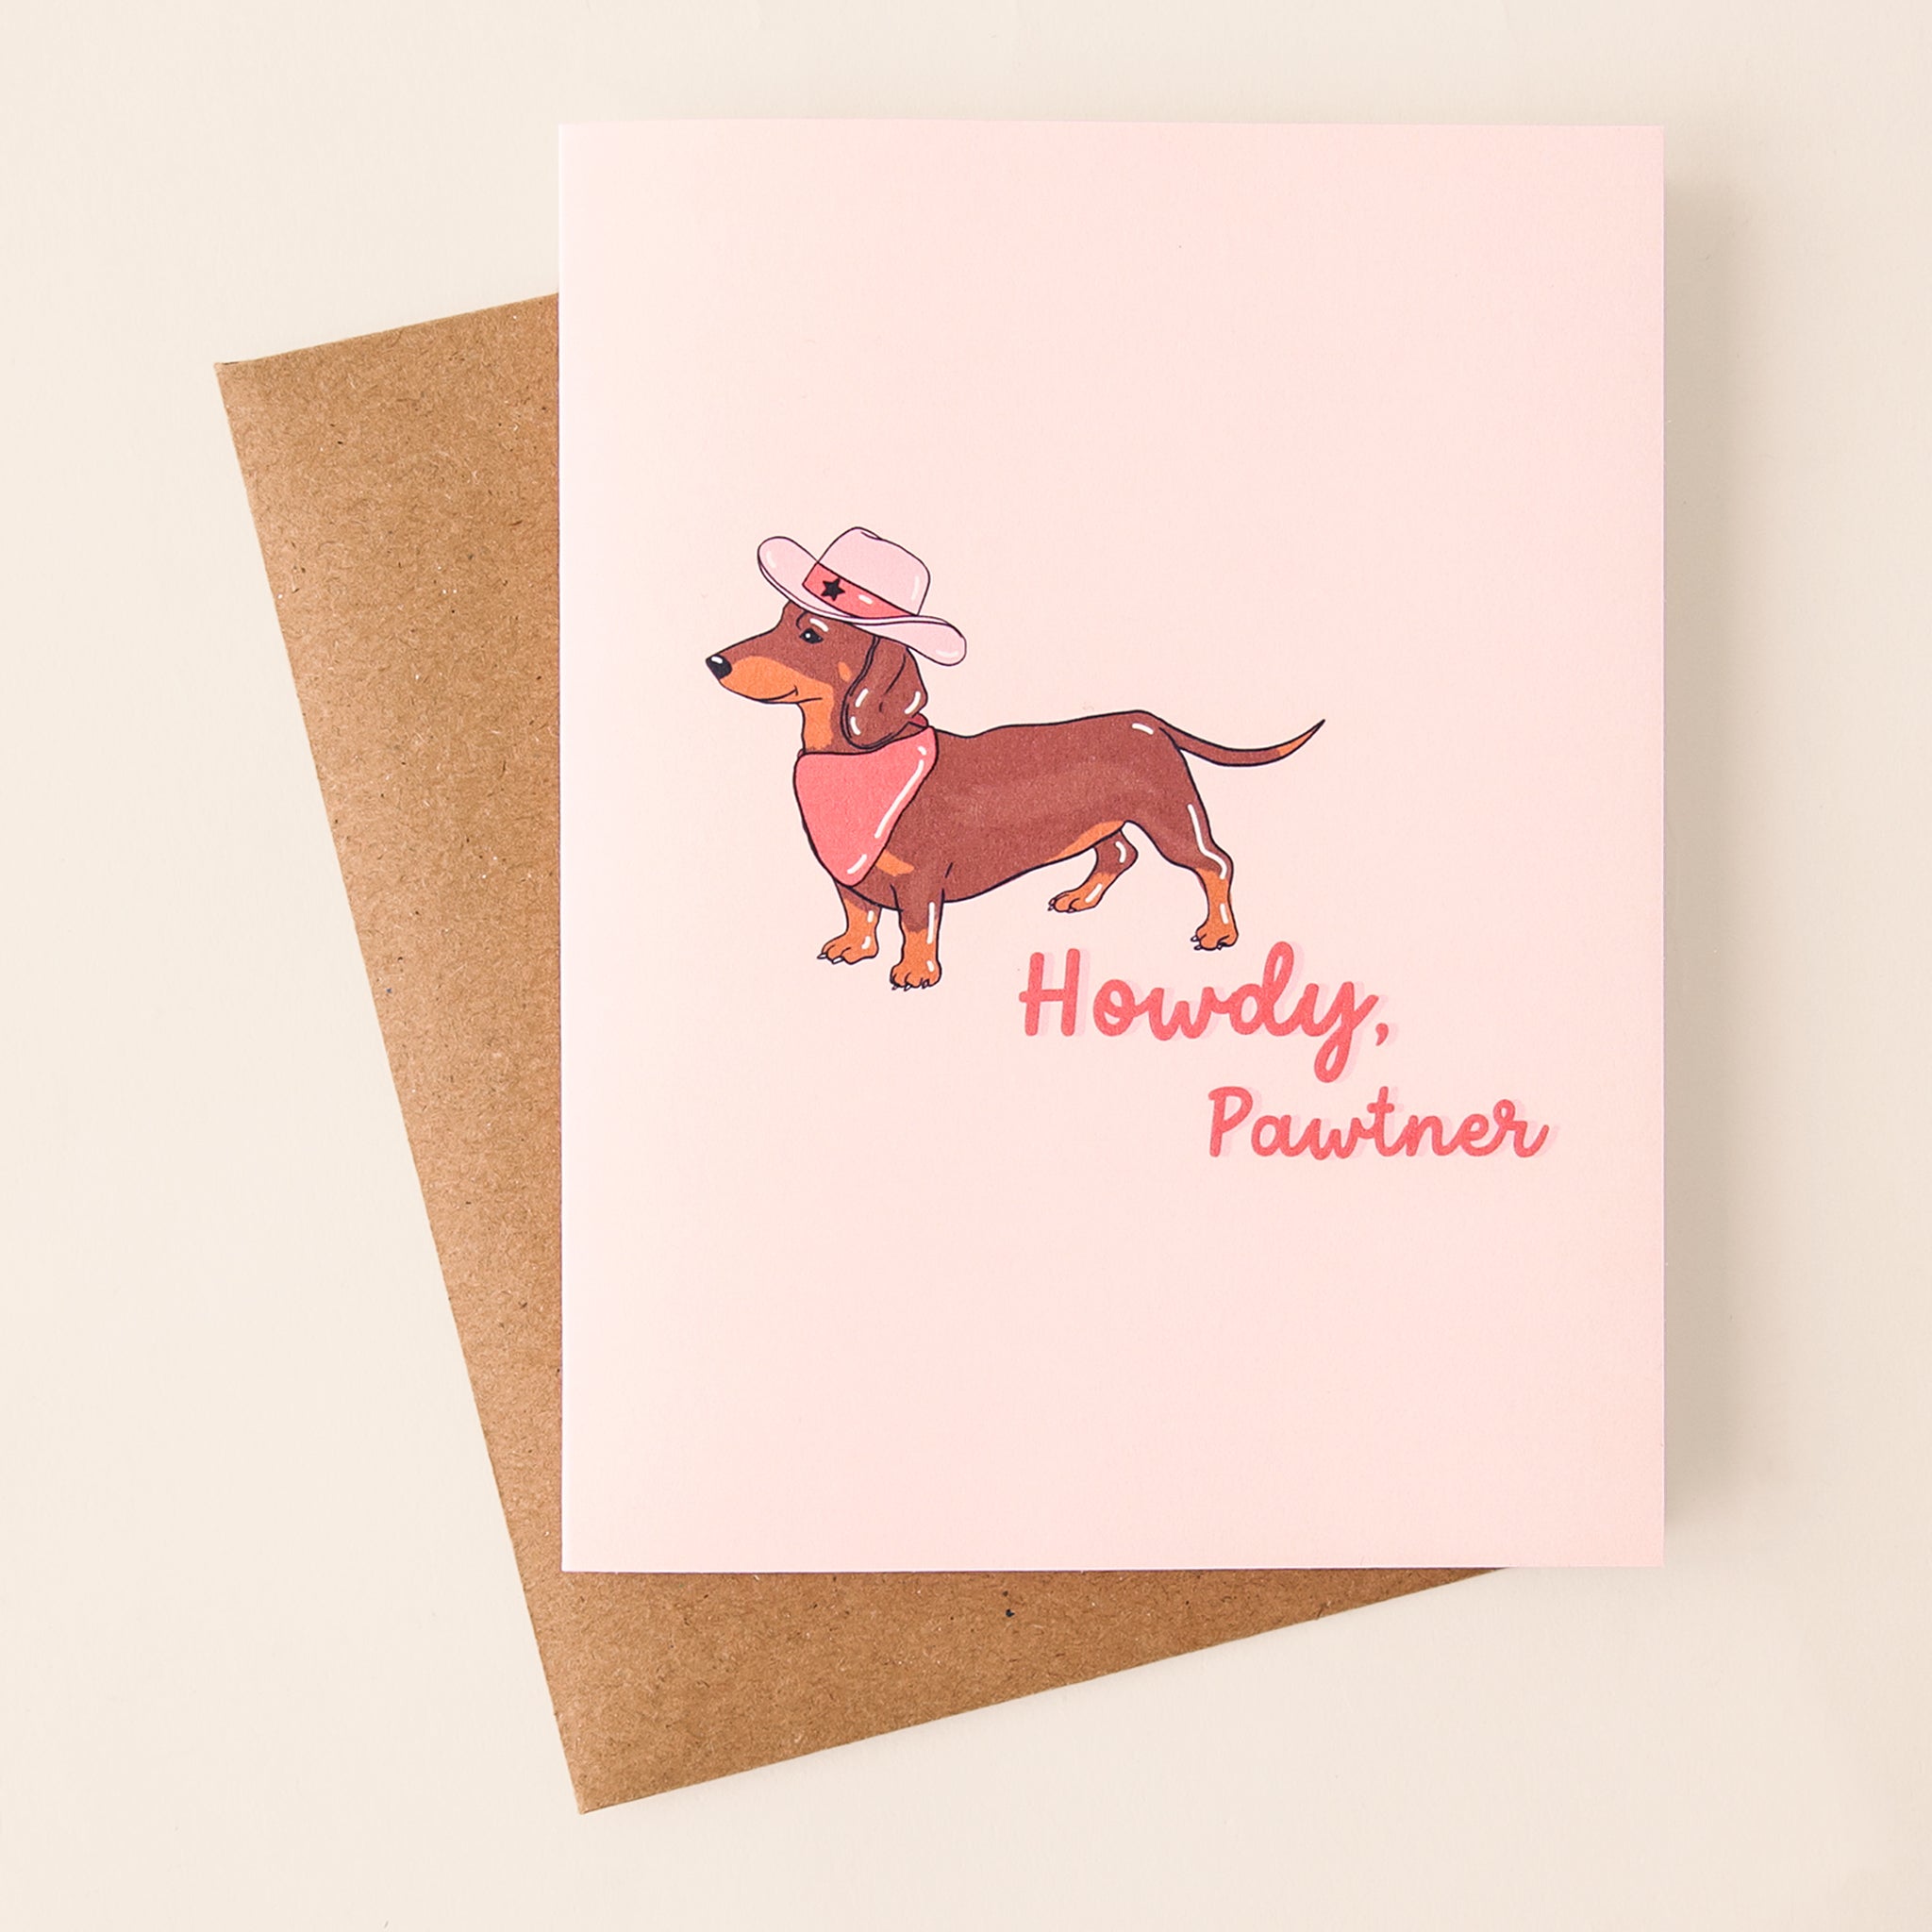 On a tan background is a light pink card with an image of a Weiner dog in a pink bandana and a western cowgirl hat along with pink cursive text to its right that reads, "Howdy Partner".